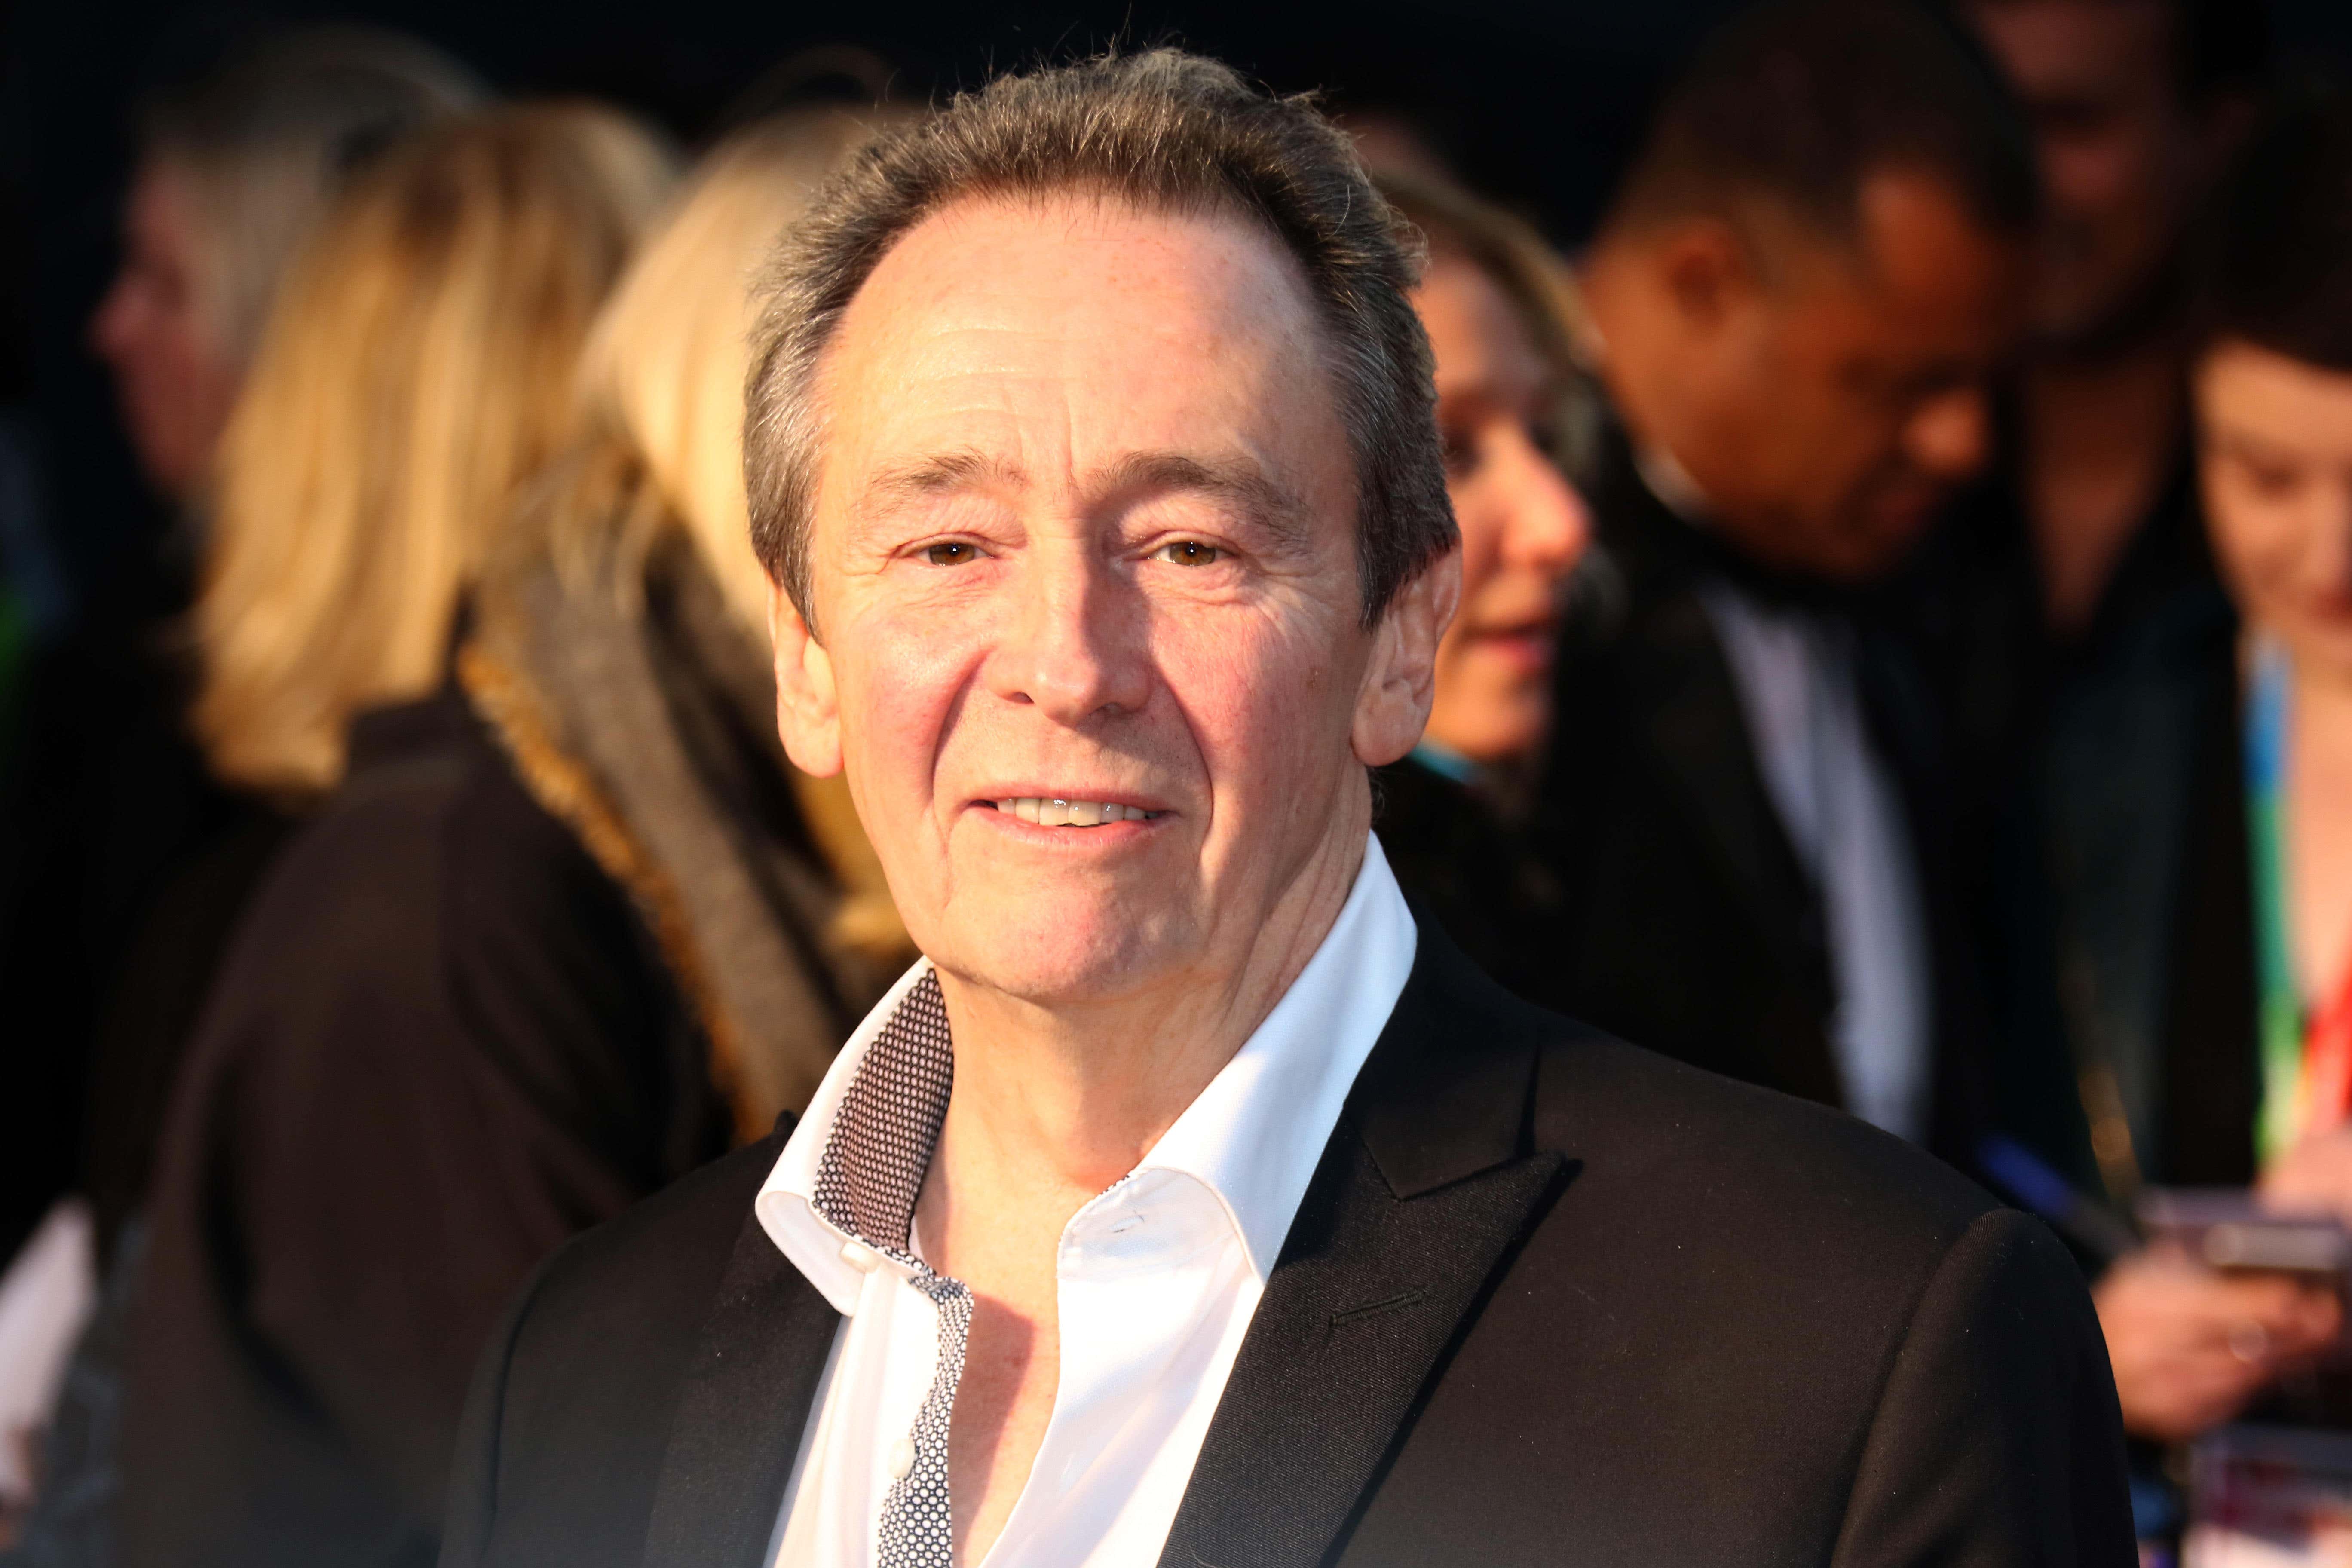 Paul Whitehouse has told the High Court journalists at the Mirror’s publisher ‘overstepped the mark’ and were ‘digging around’ into his ex-wife’s private life